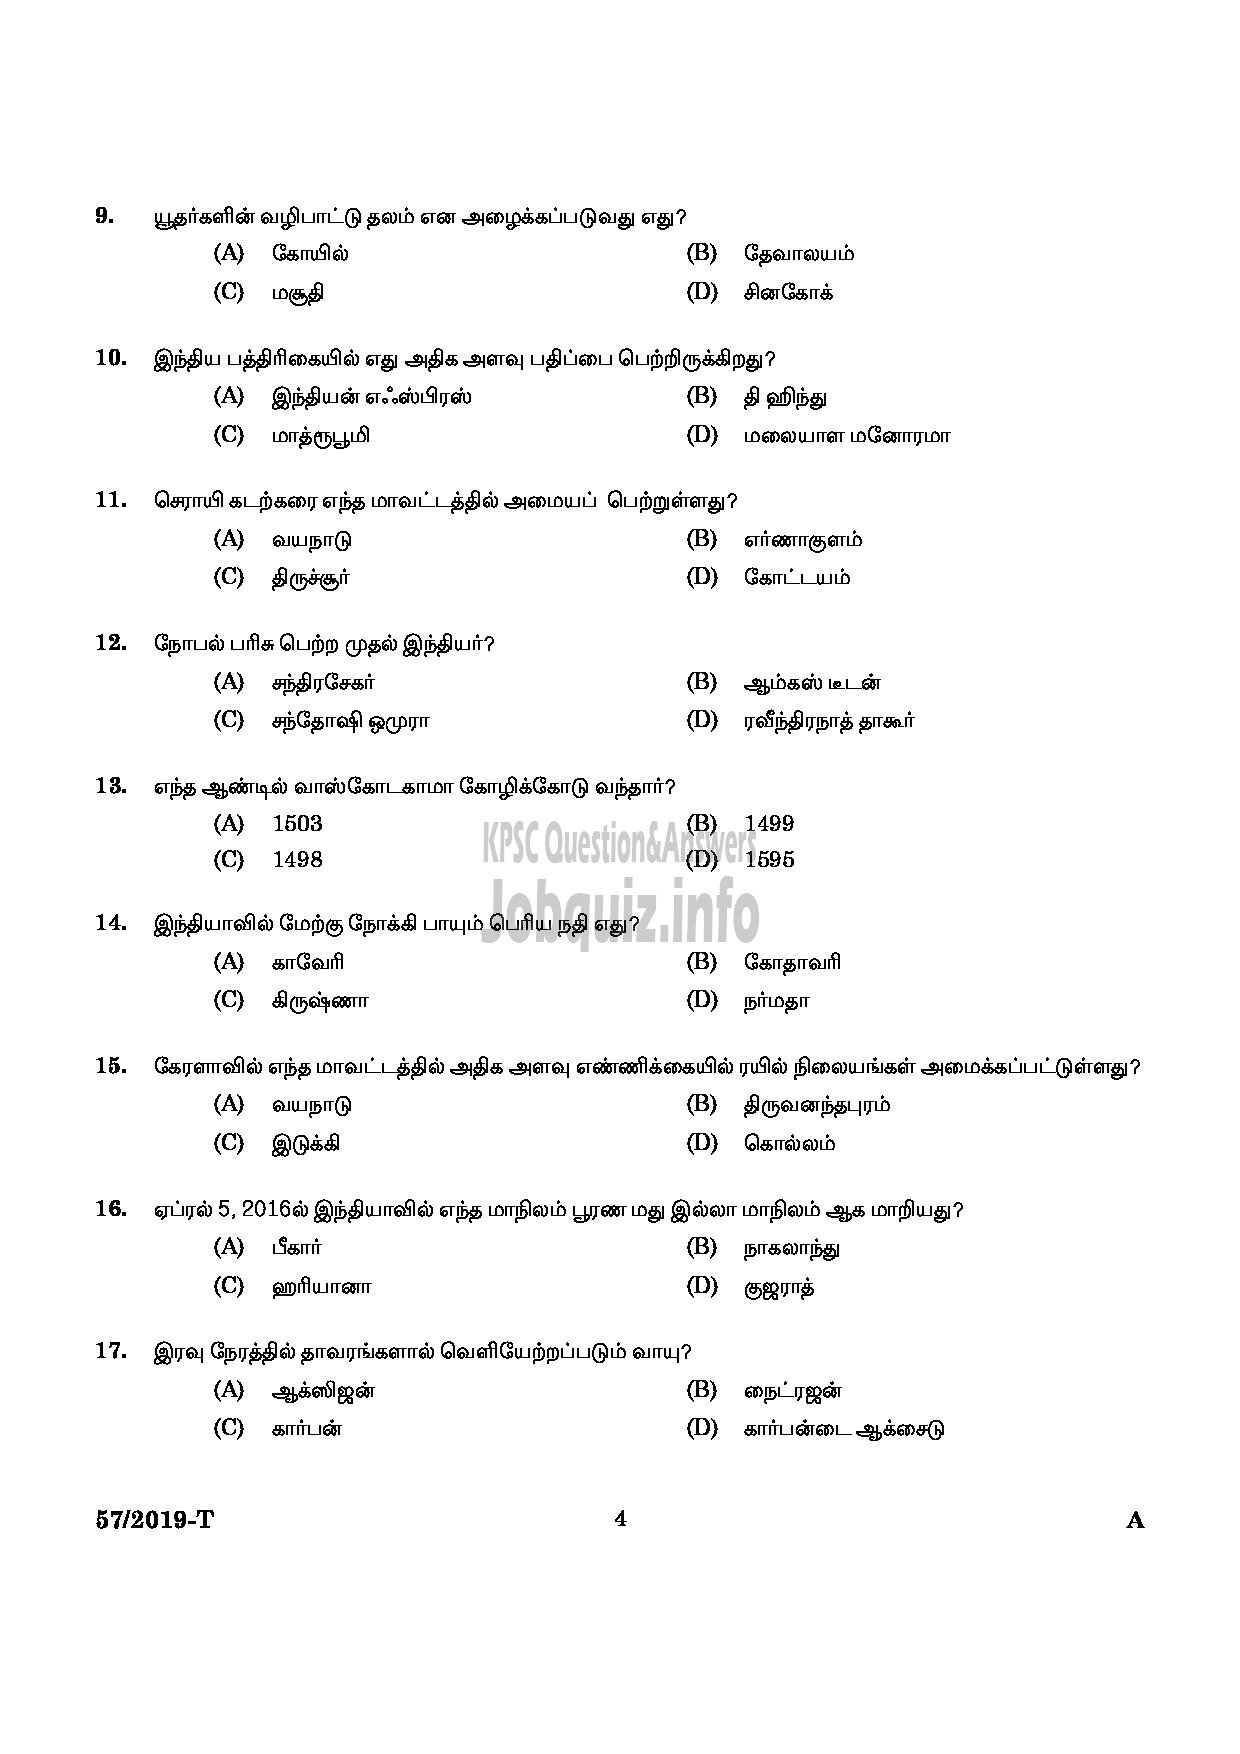 Kerala PSC Question Paper - 	POWER LAUNDRY ATTENDER MEDICAL EDUCATION TAMIL-2